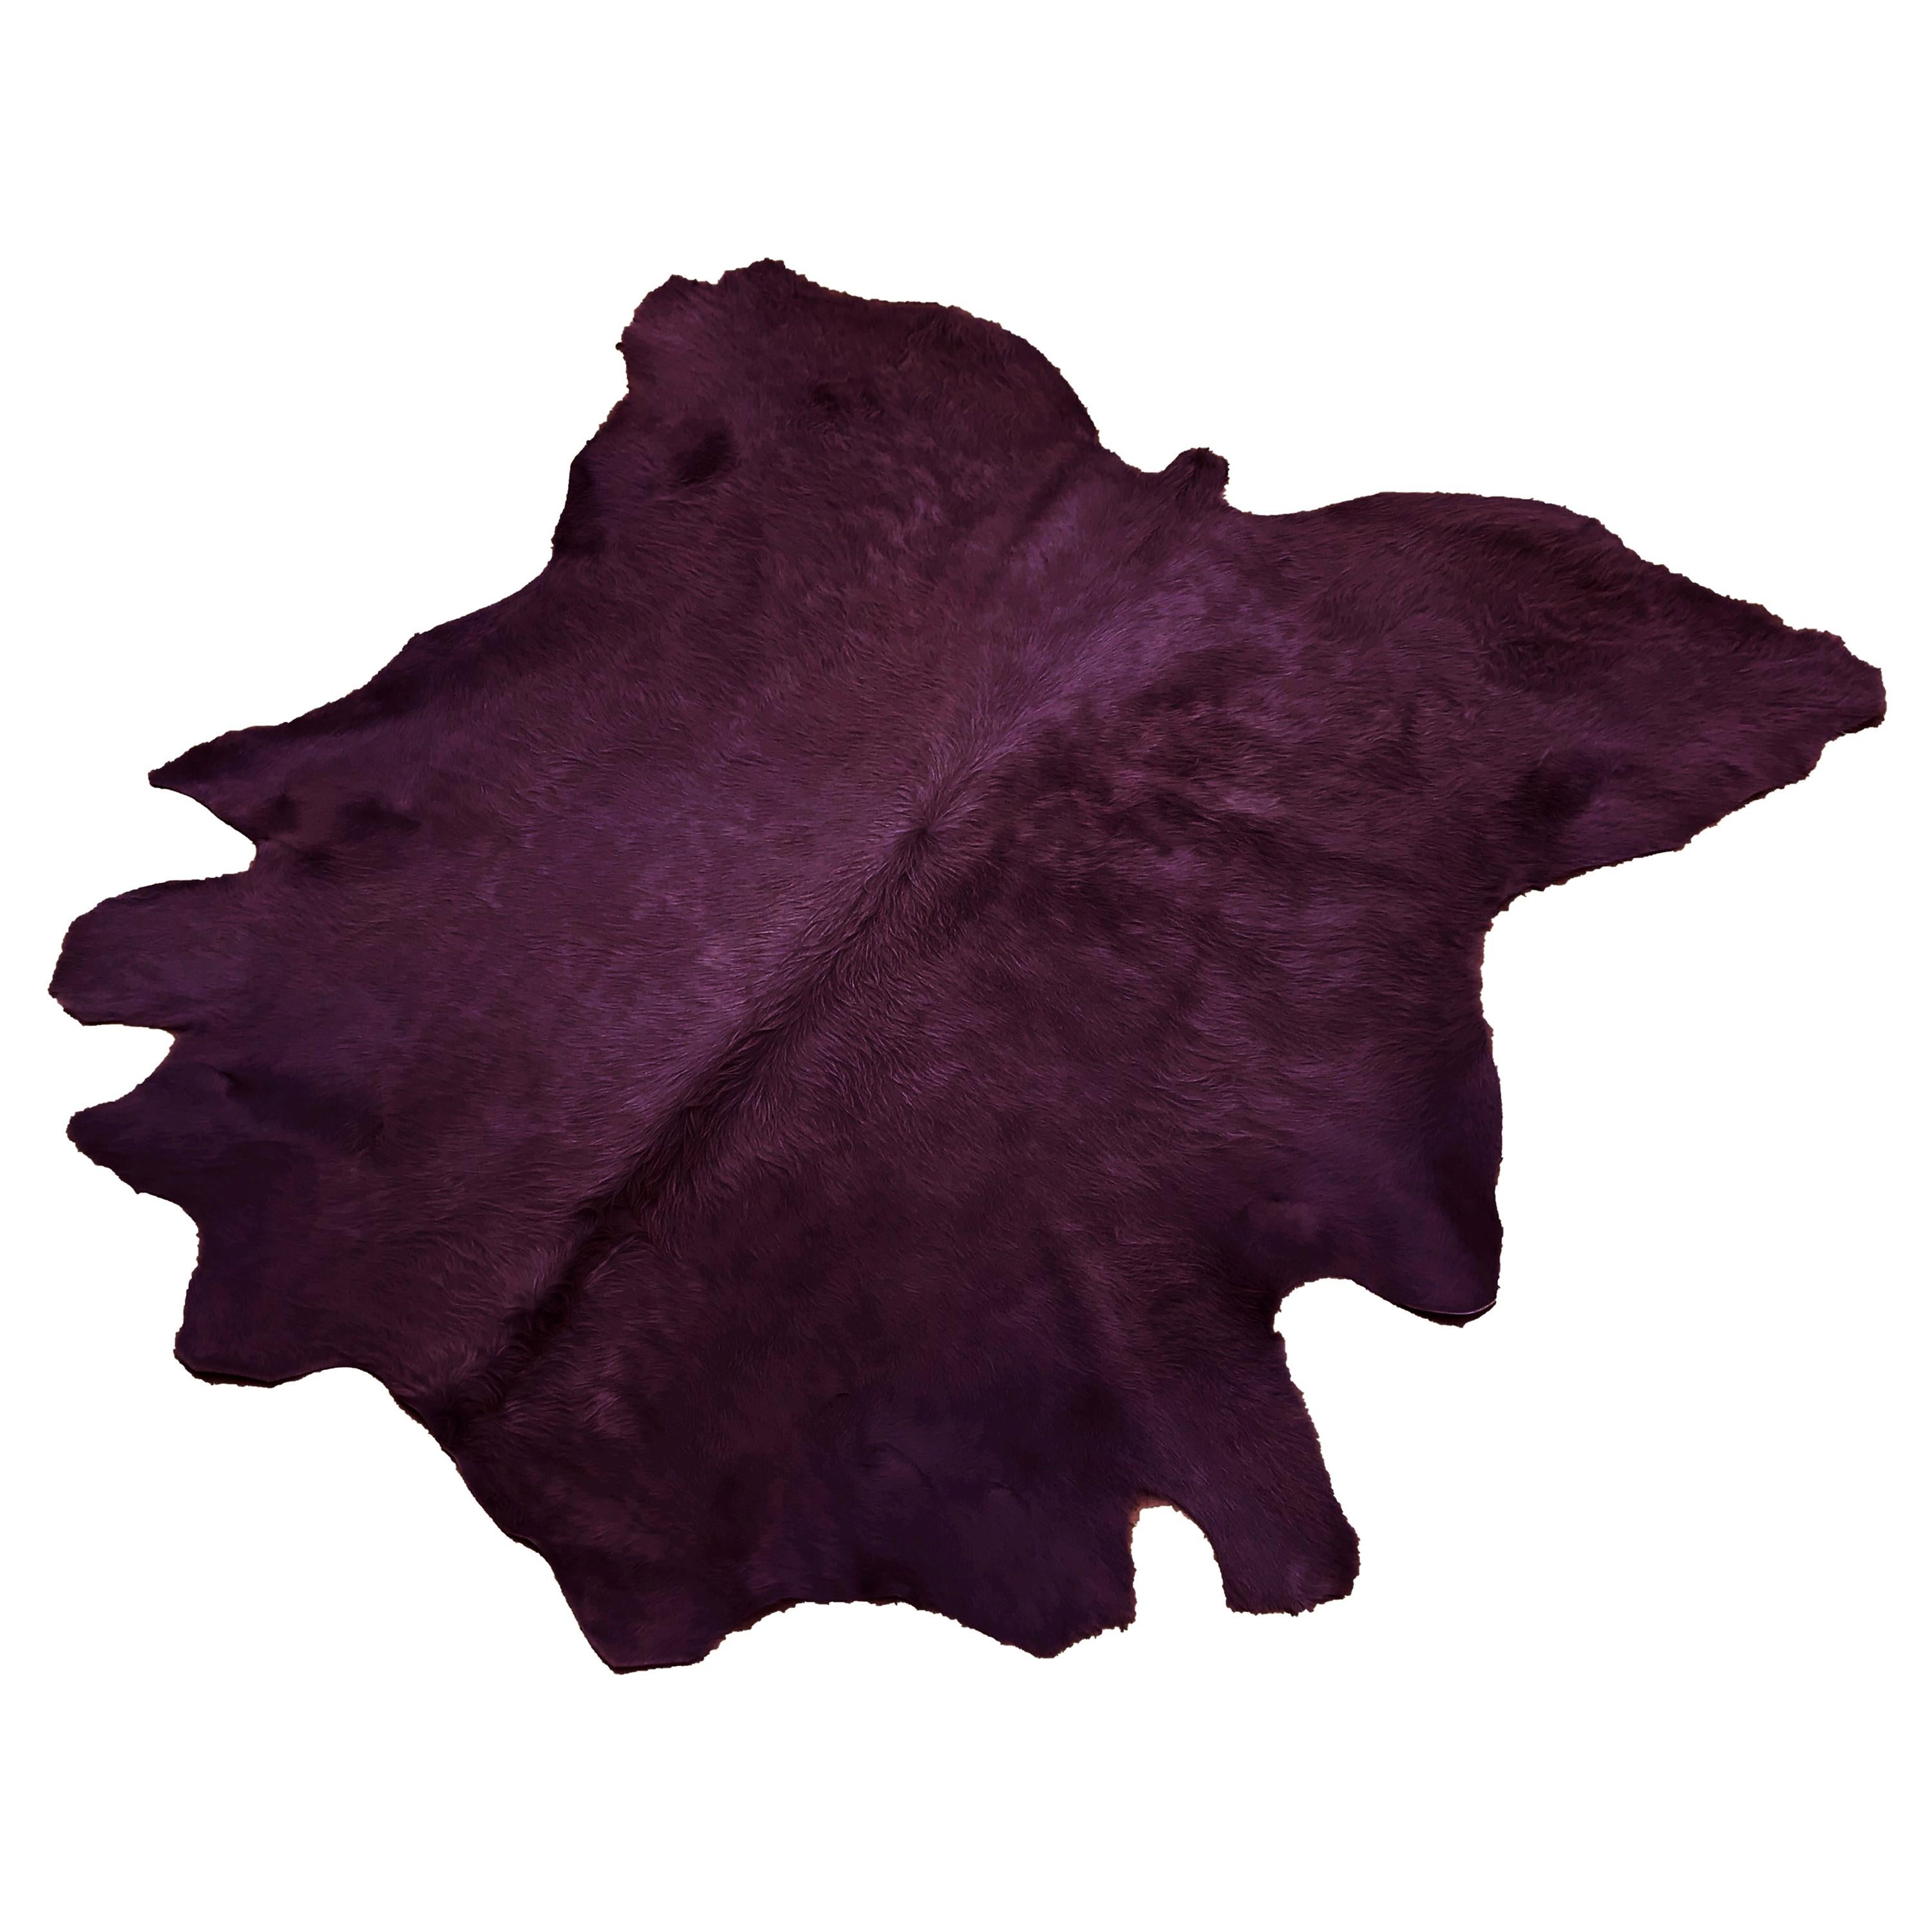 Cowhide Rug, Burgundy, Hand Dyed, Sustainably Sourced, Variety of Colors For Sale